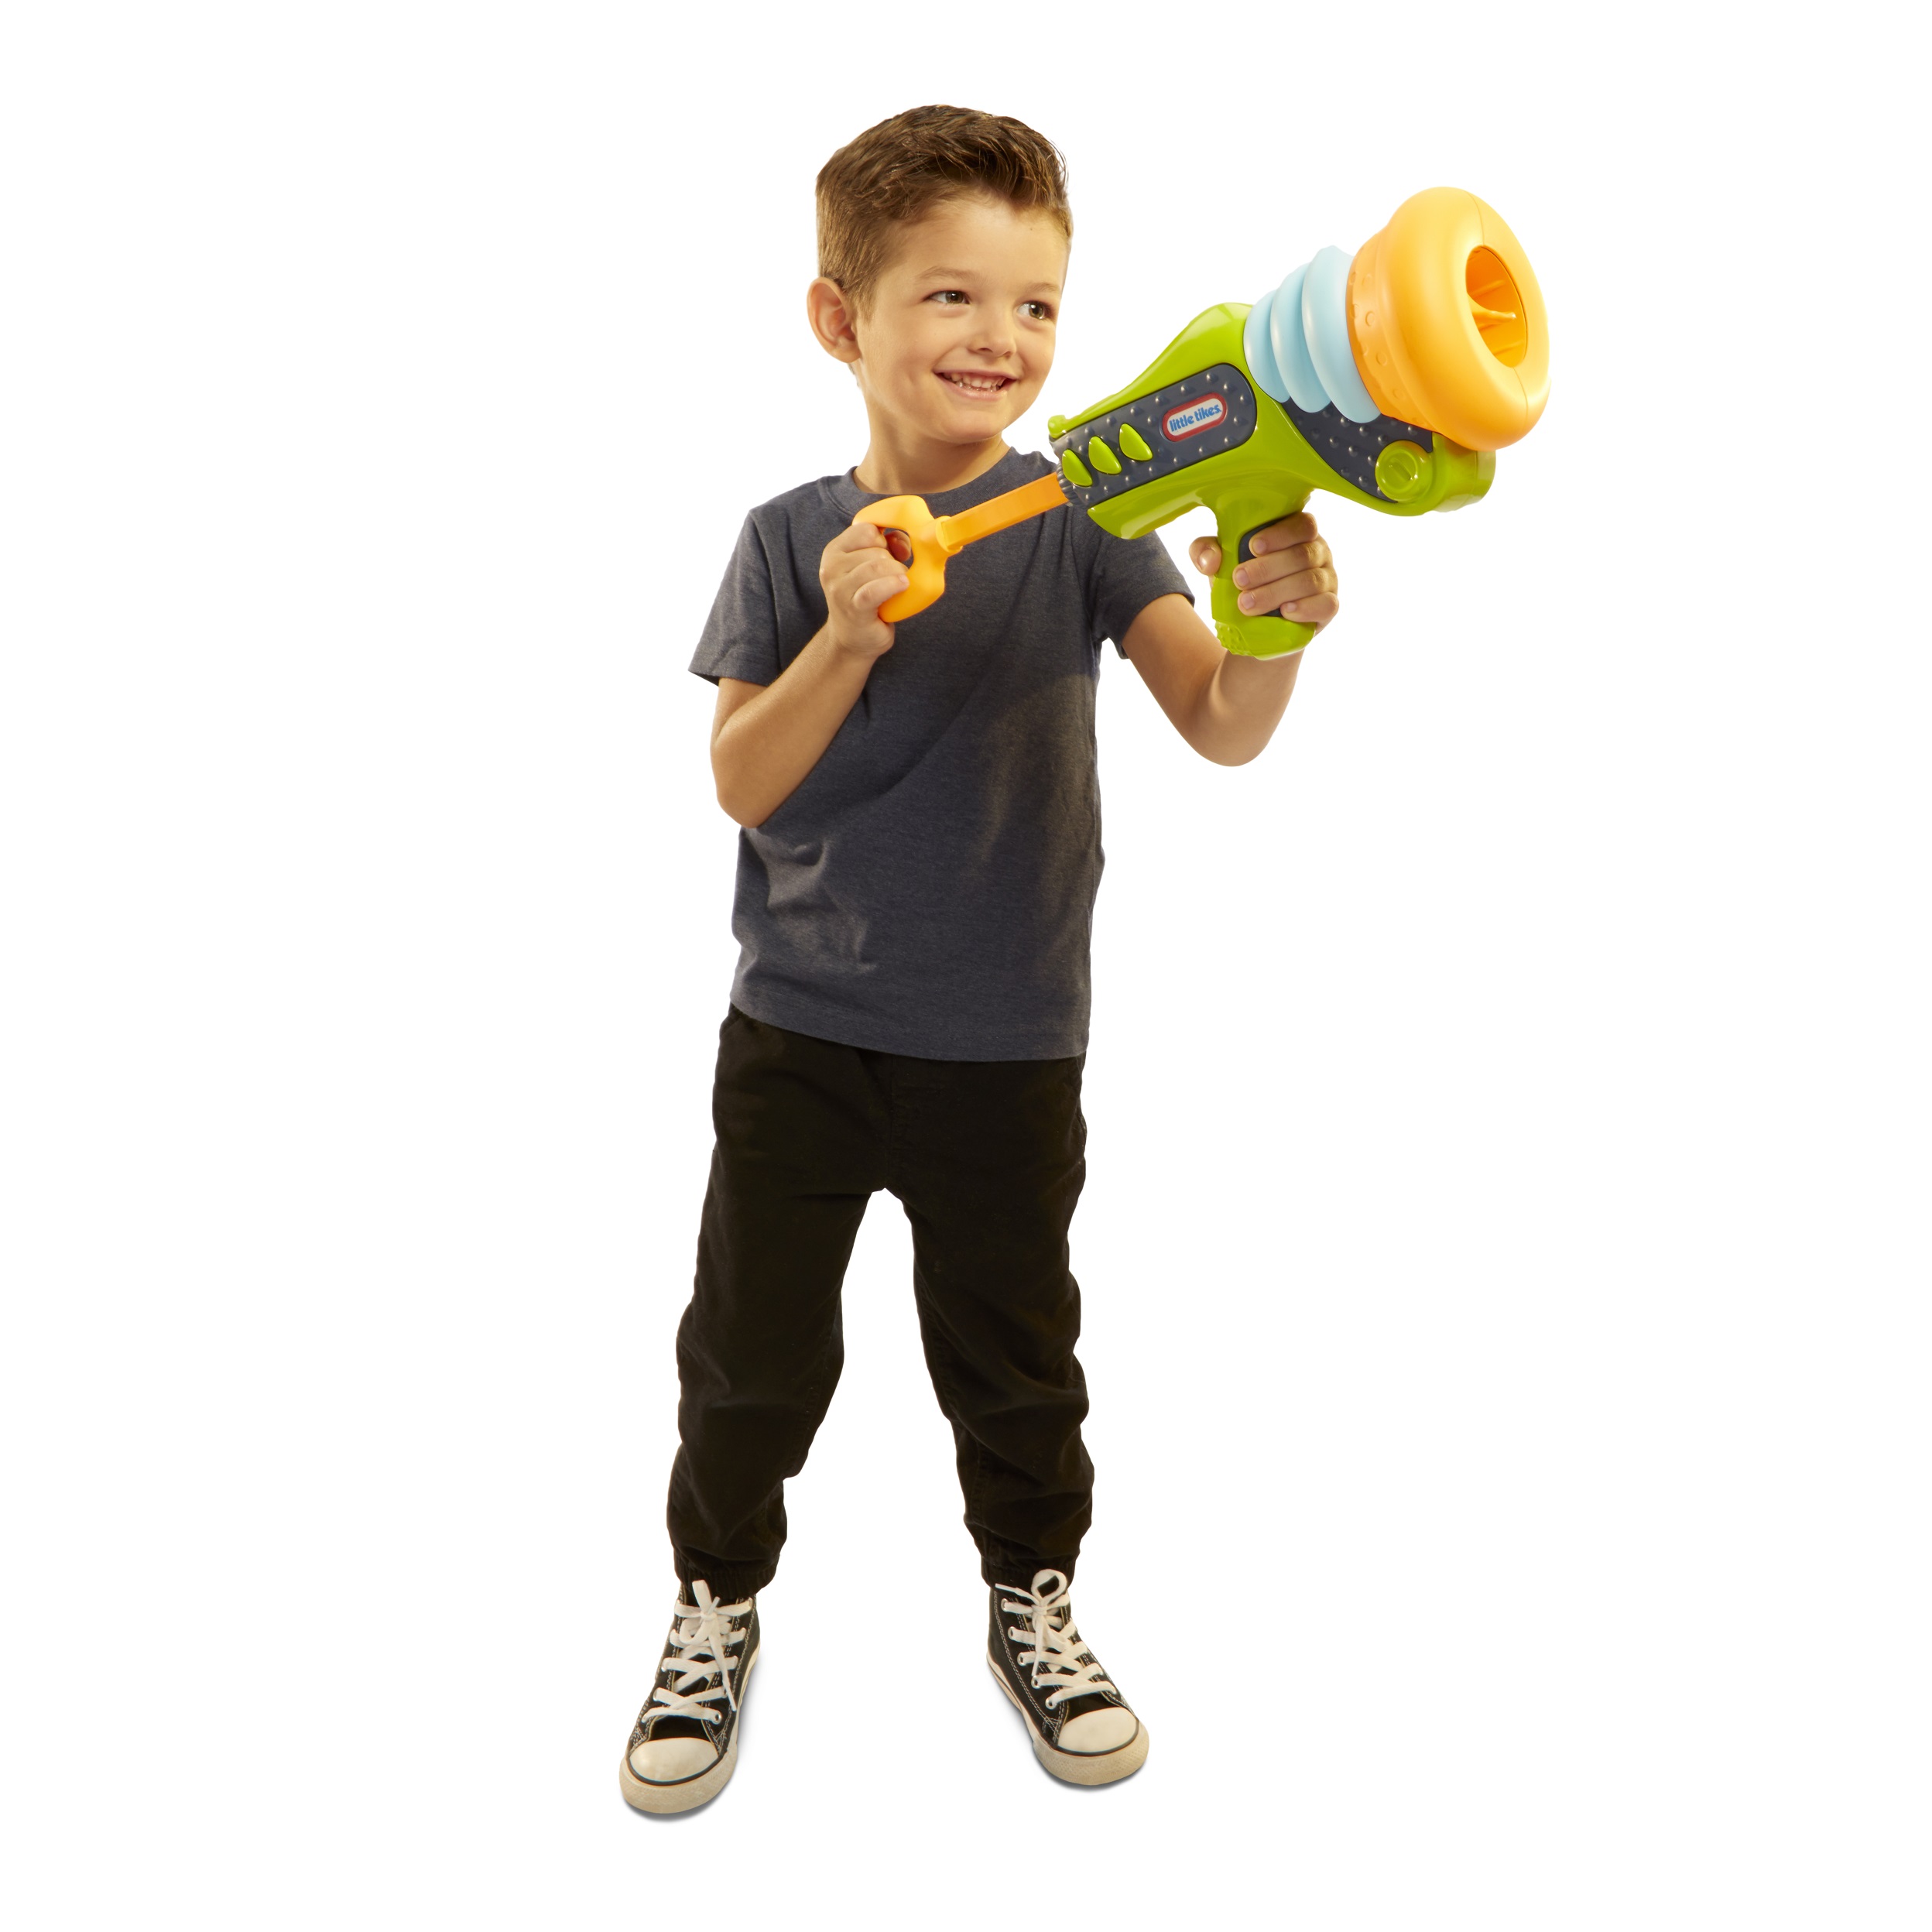 Little Tikes 651250 Mighty Blasters Boom Blaster Toy Blaster with 3 Soft Power Pods - image 1 of 6